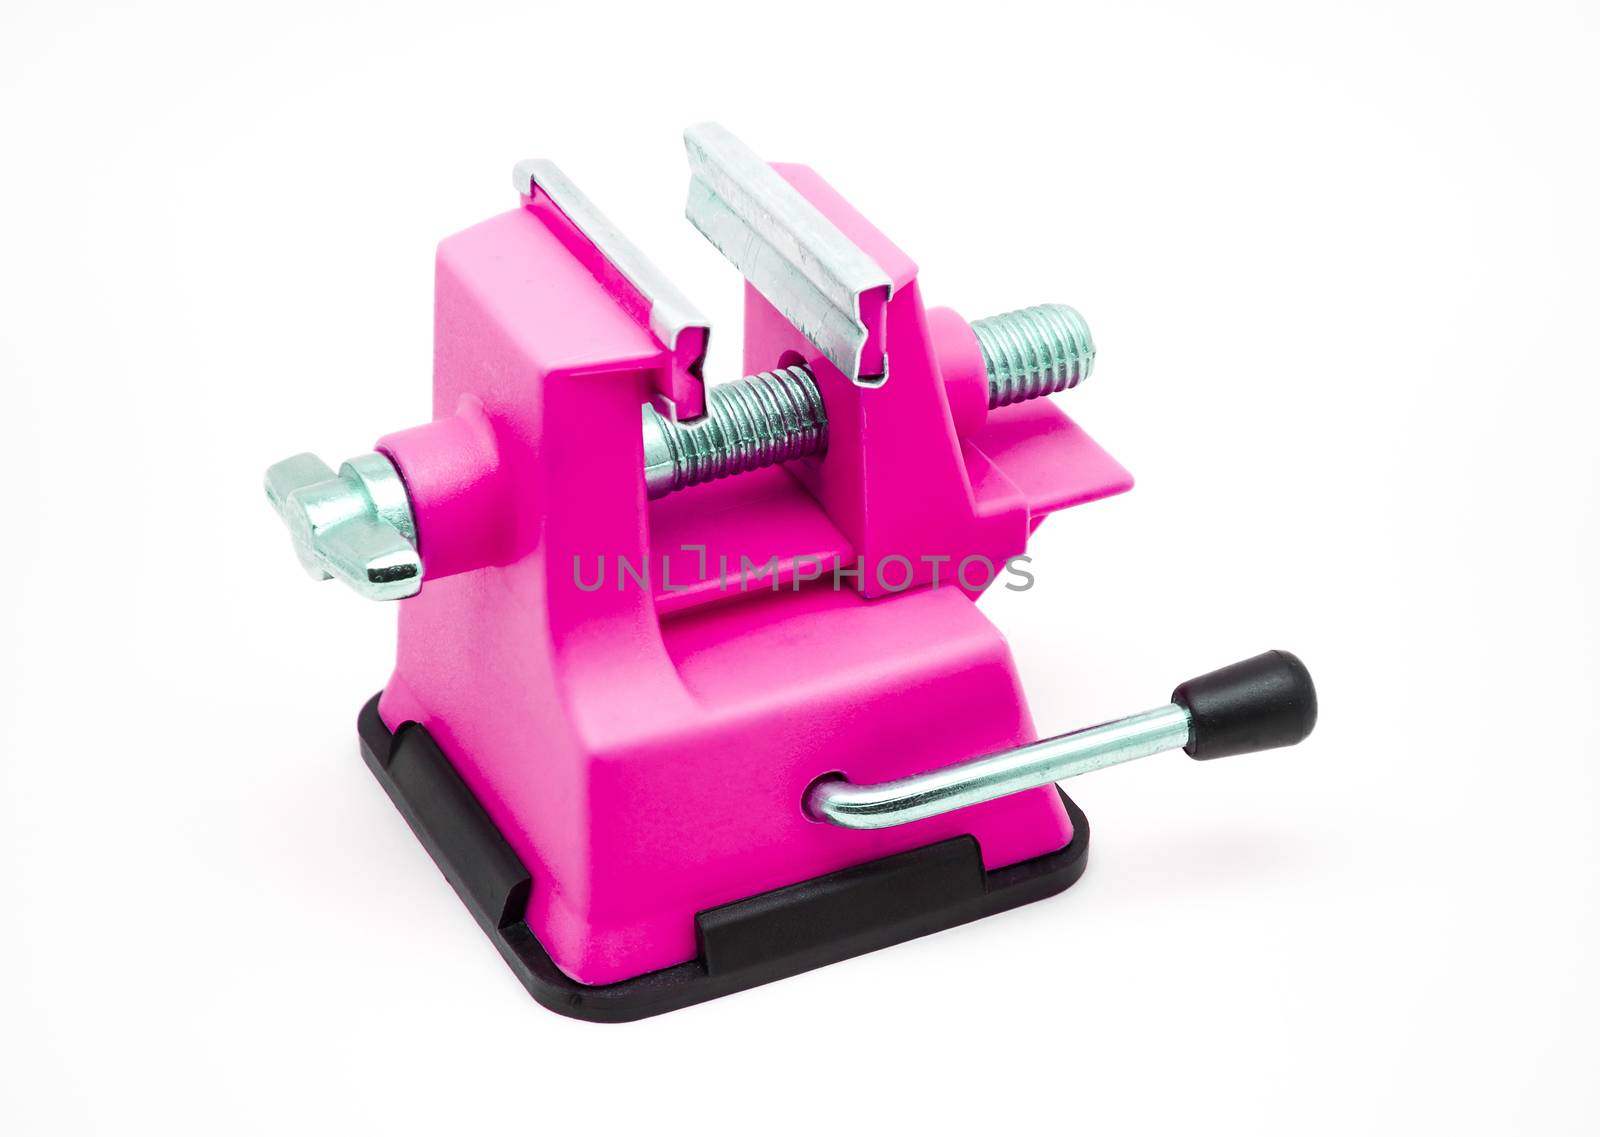 Magenta Plastic Bench Vise with Suction Cup.